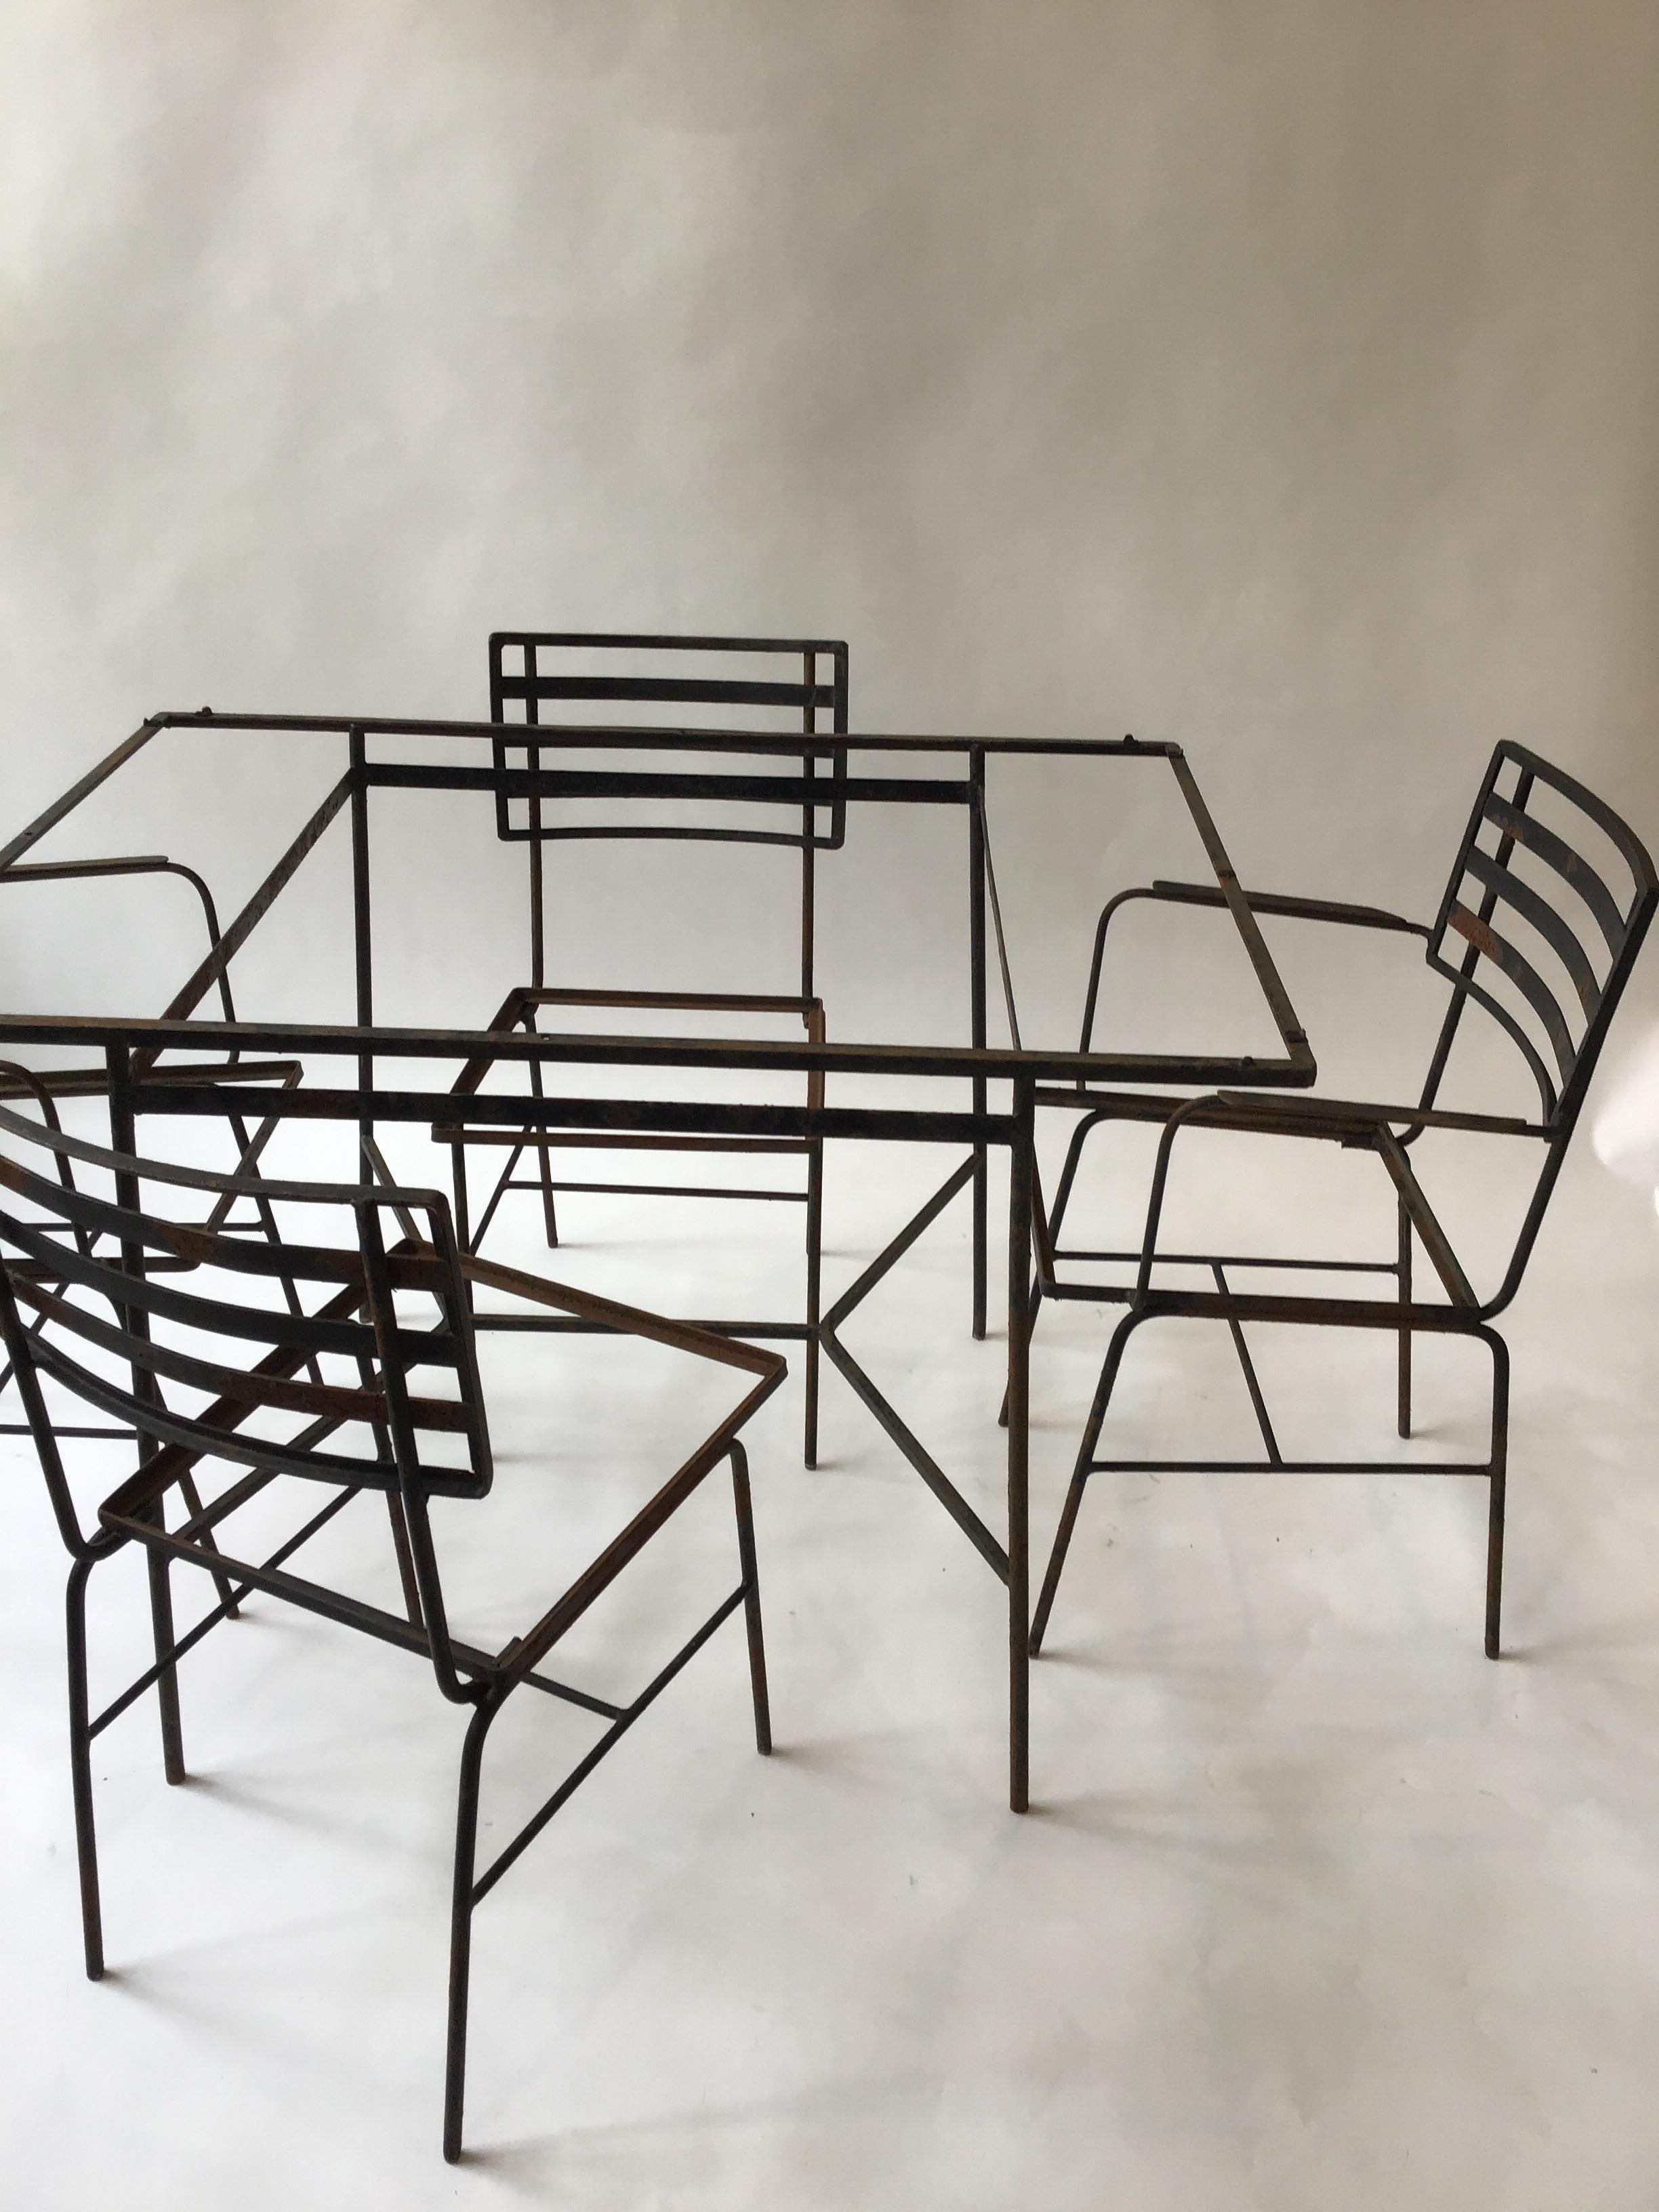 1950s iron outdoor set. Very machine age looking. Table, 2 armchairs, 2 side chairs, no glass.